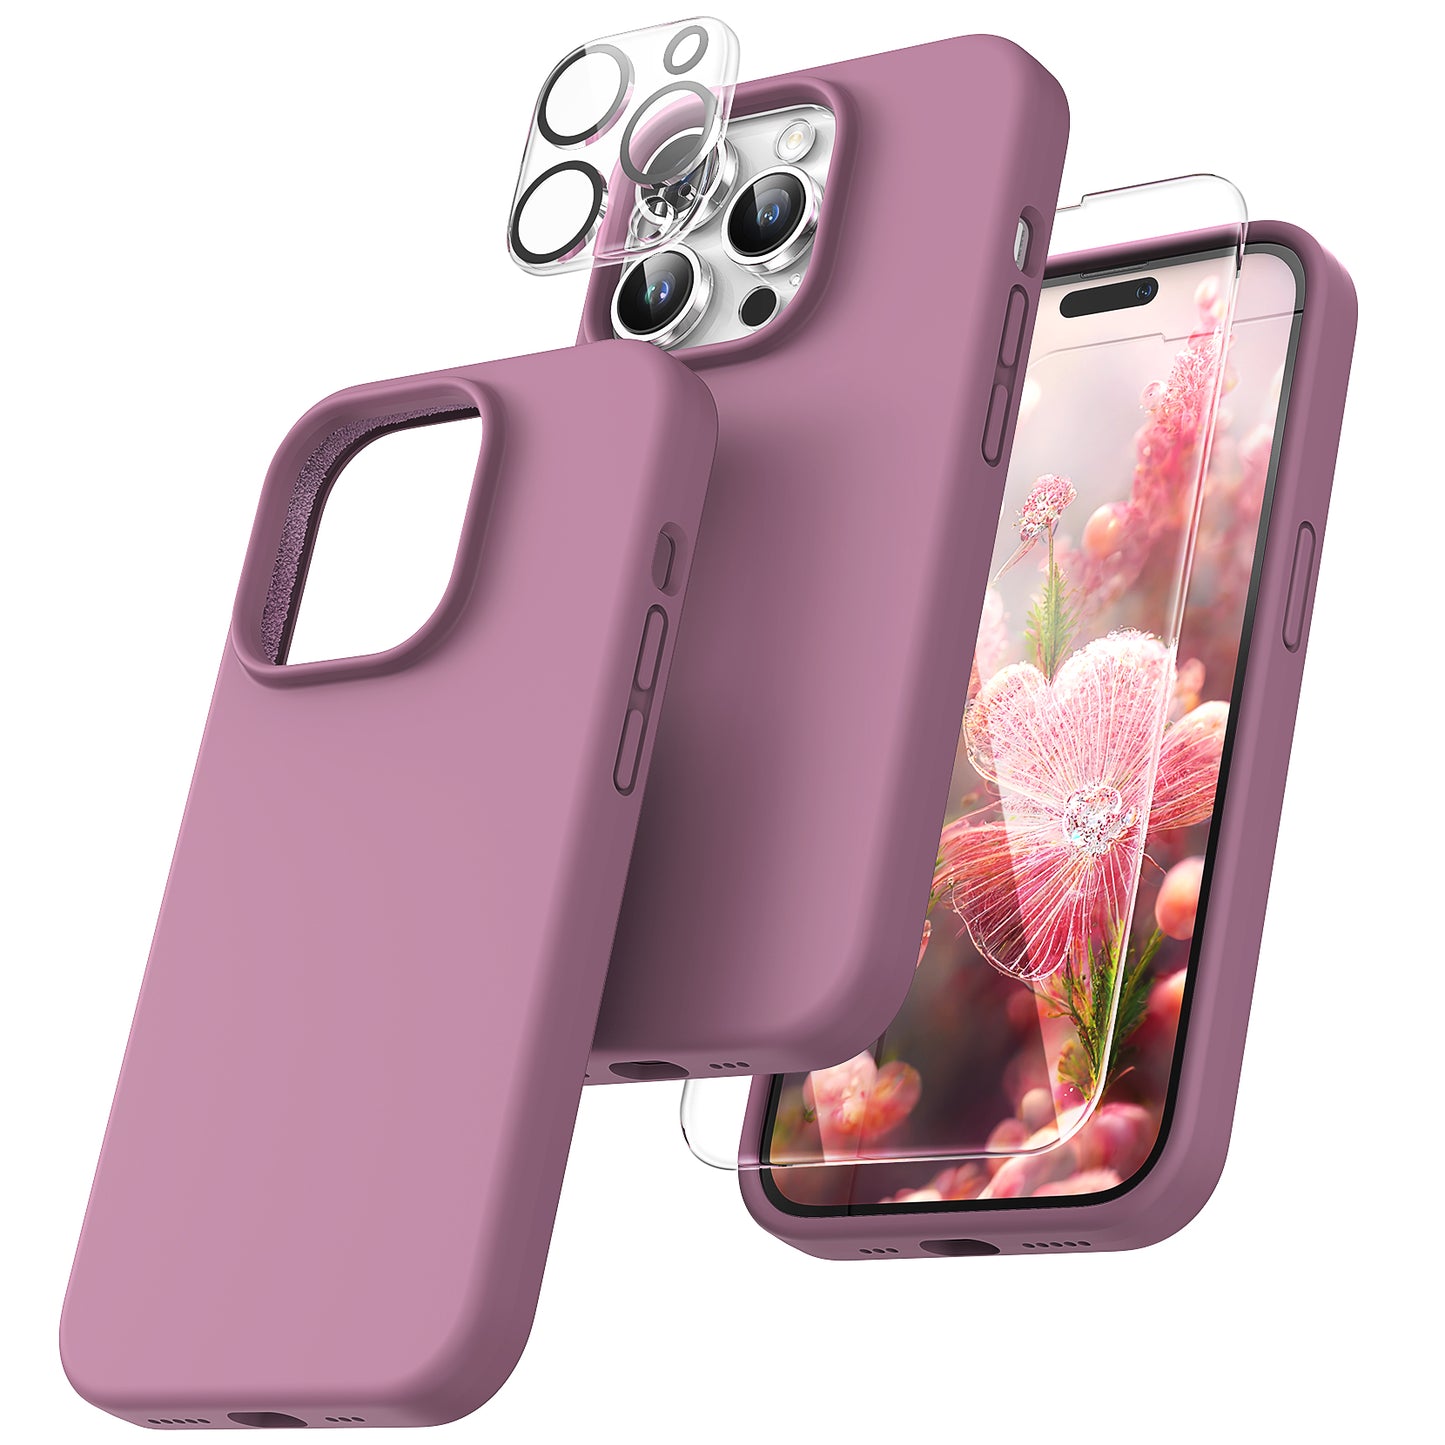 TOCOL [5 in 1] for iPhone 14 Pro Max Case, 2 Screen Protector + 2 Camera Lens Protector, Slim Liquid Silicone Phone Case iPhone 14 Pro Max 6.7 Inch, [Anti-Scratch] [Drop Protection], Lilac Purple